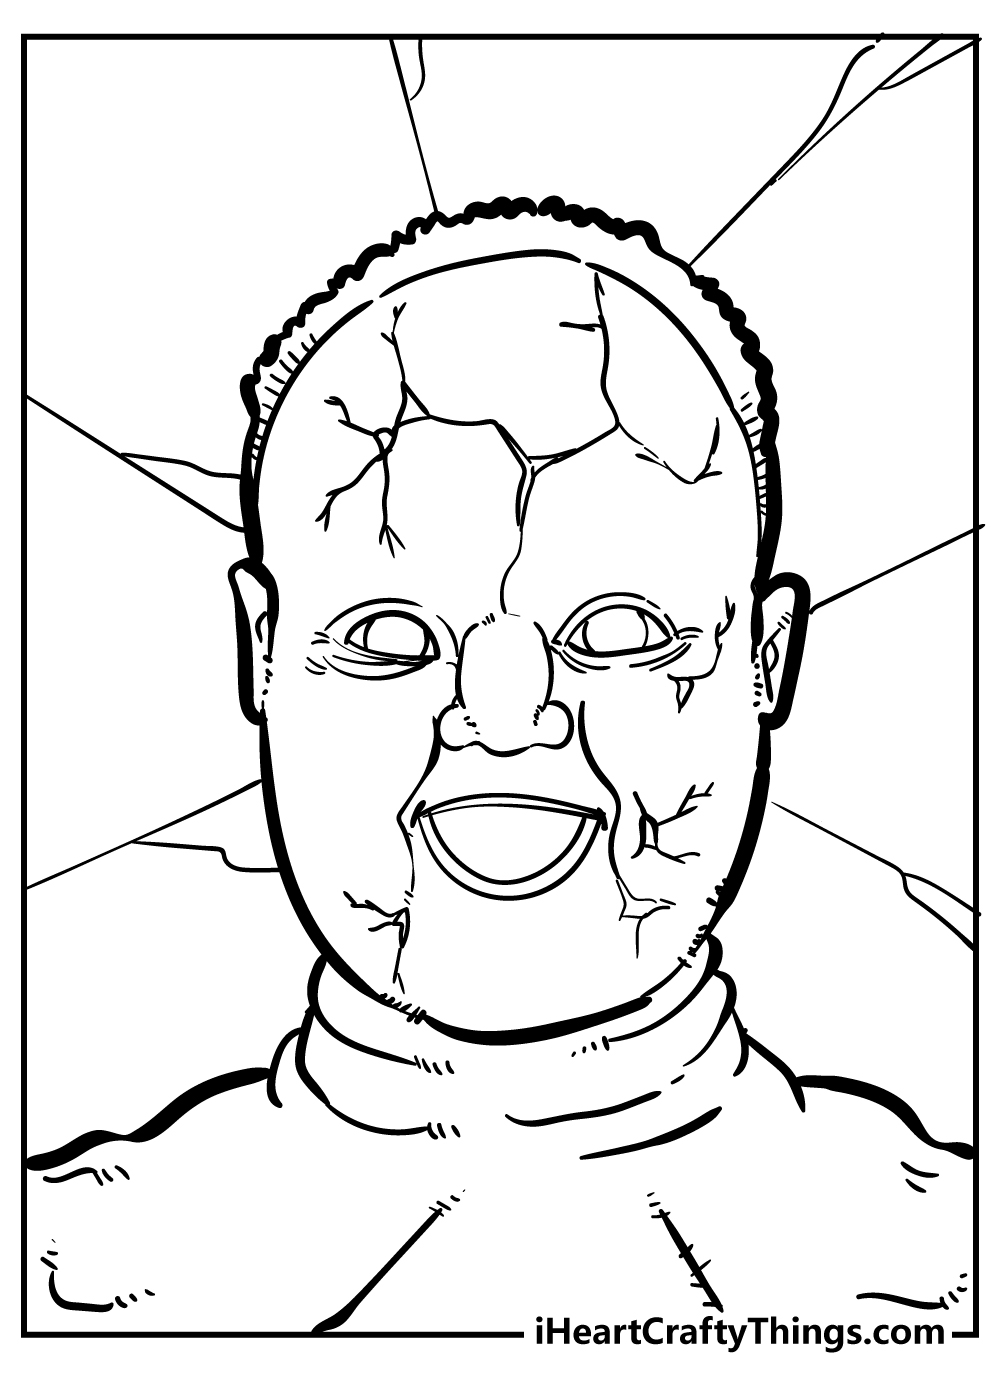 Printable Creepy Coloring Pages Updated 20